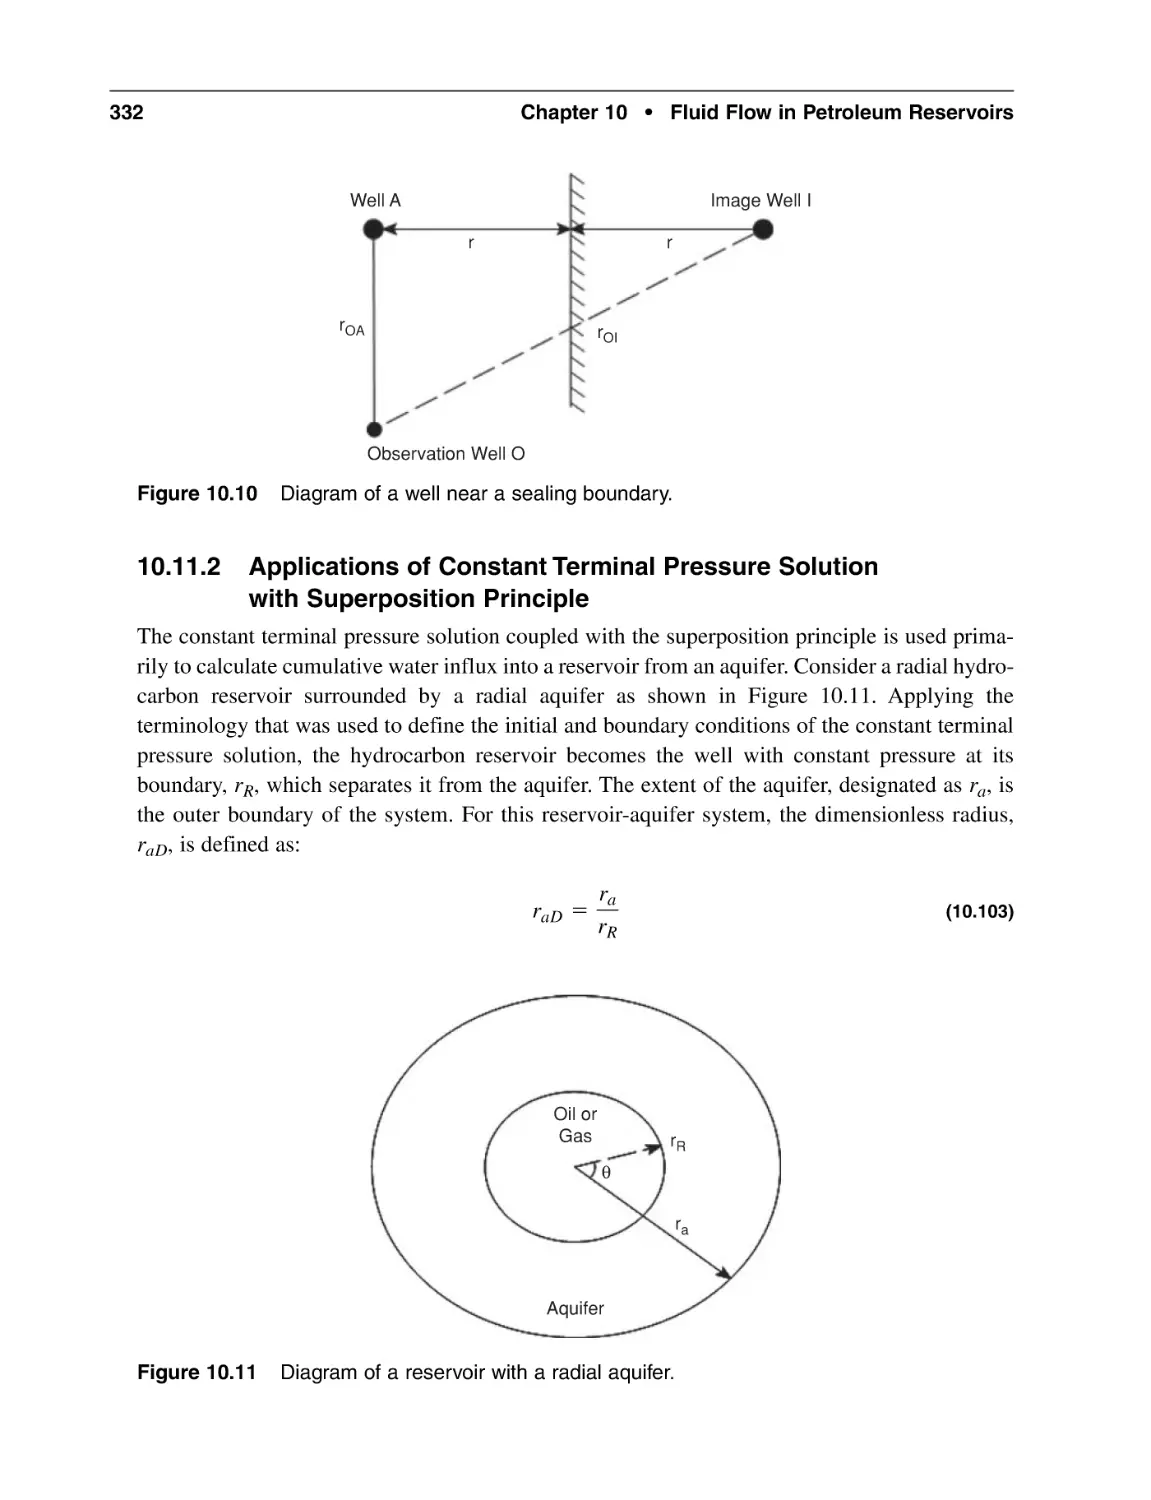 10.11.2 Applications of Constant Terminal Pressure Solution with Superposition Principle